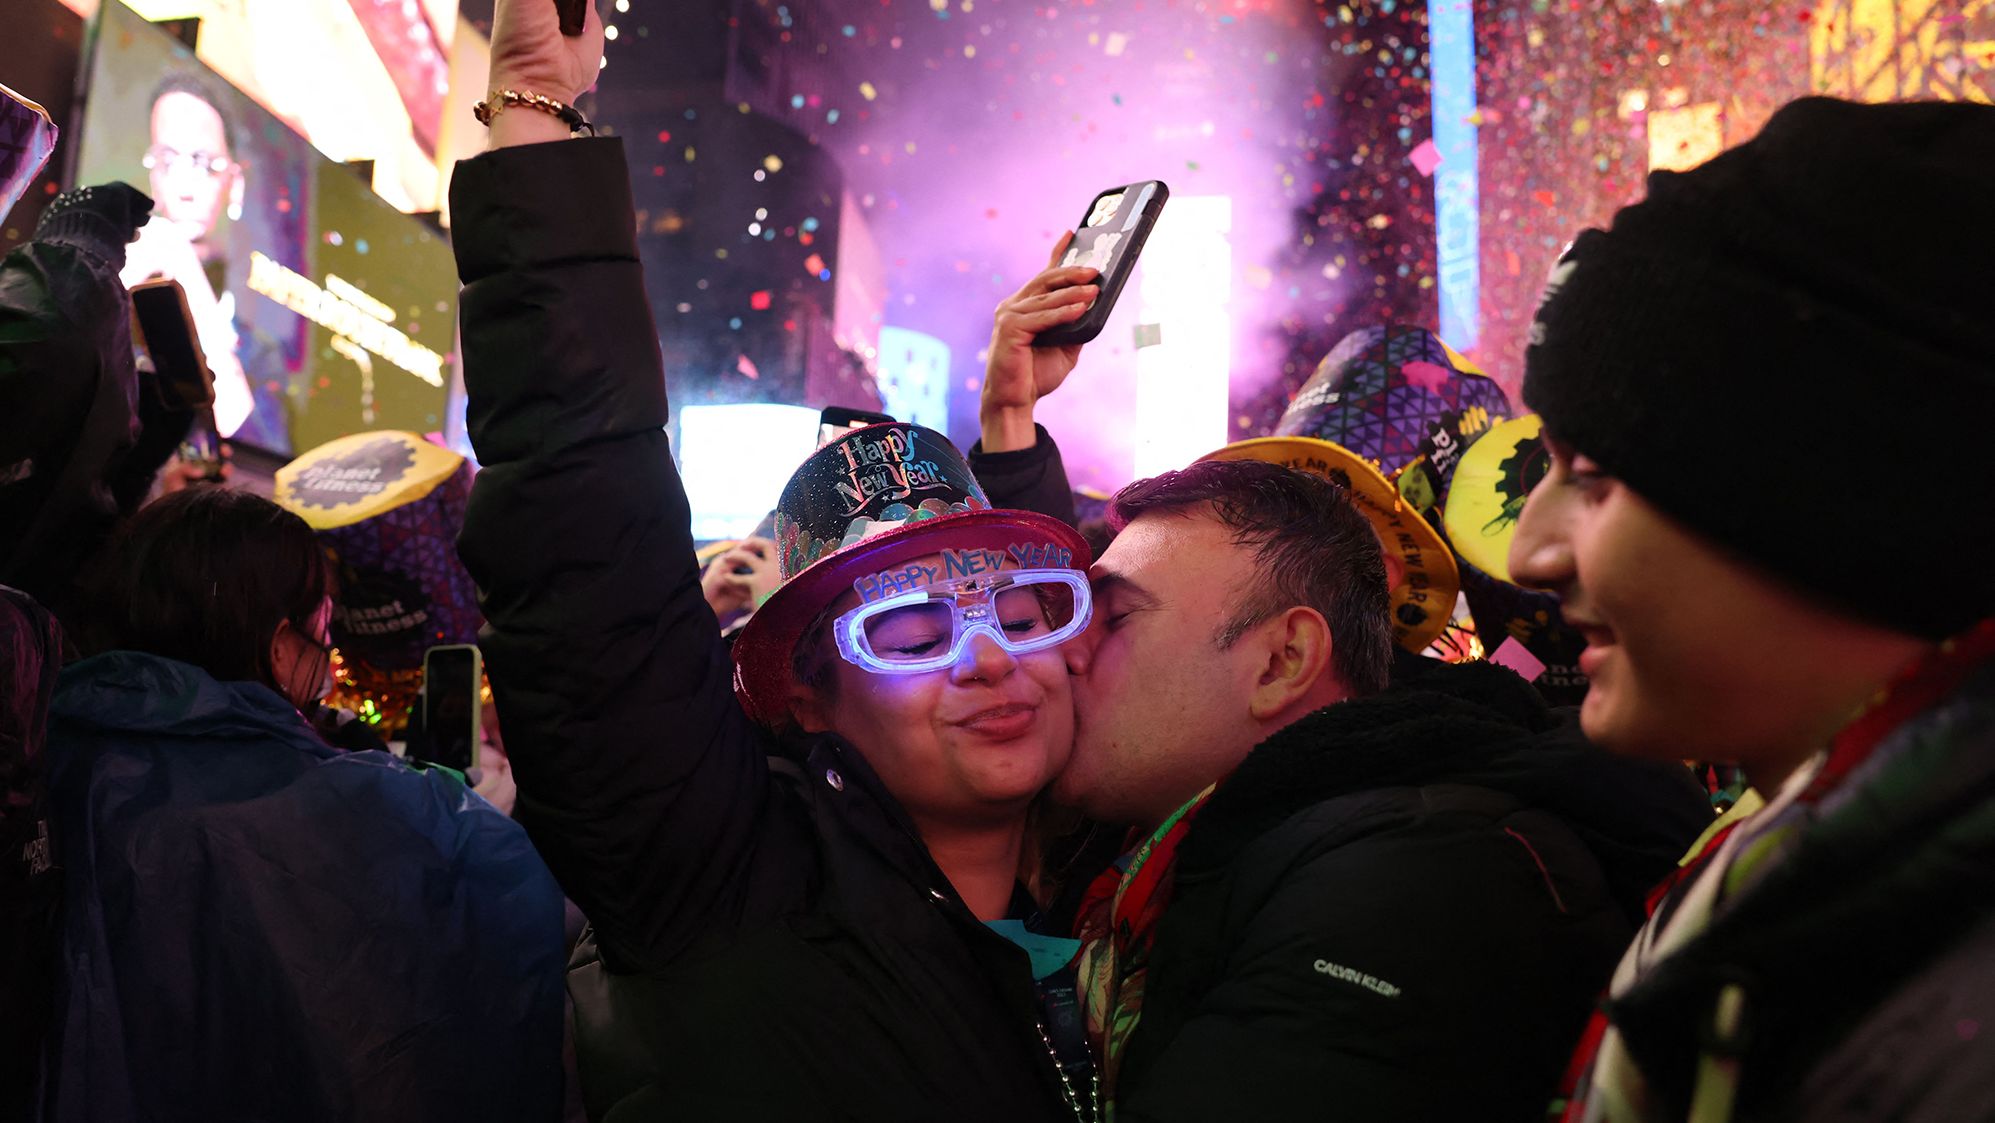 People kiss as confetti falls to mark the new year in New York's Times Square.